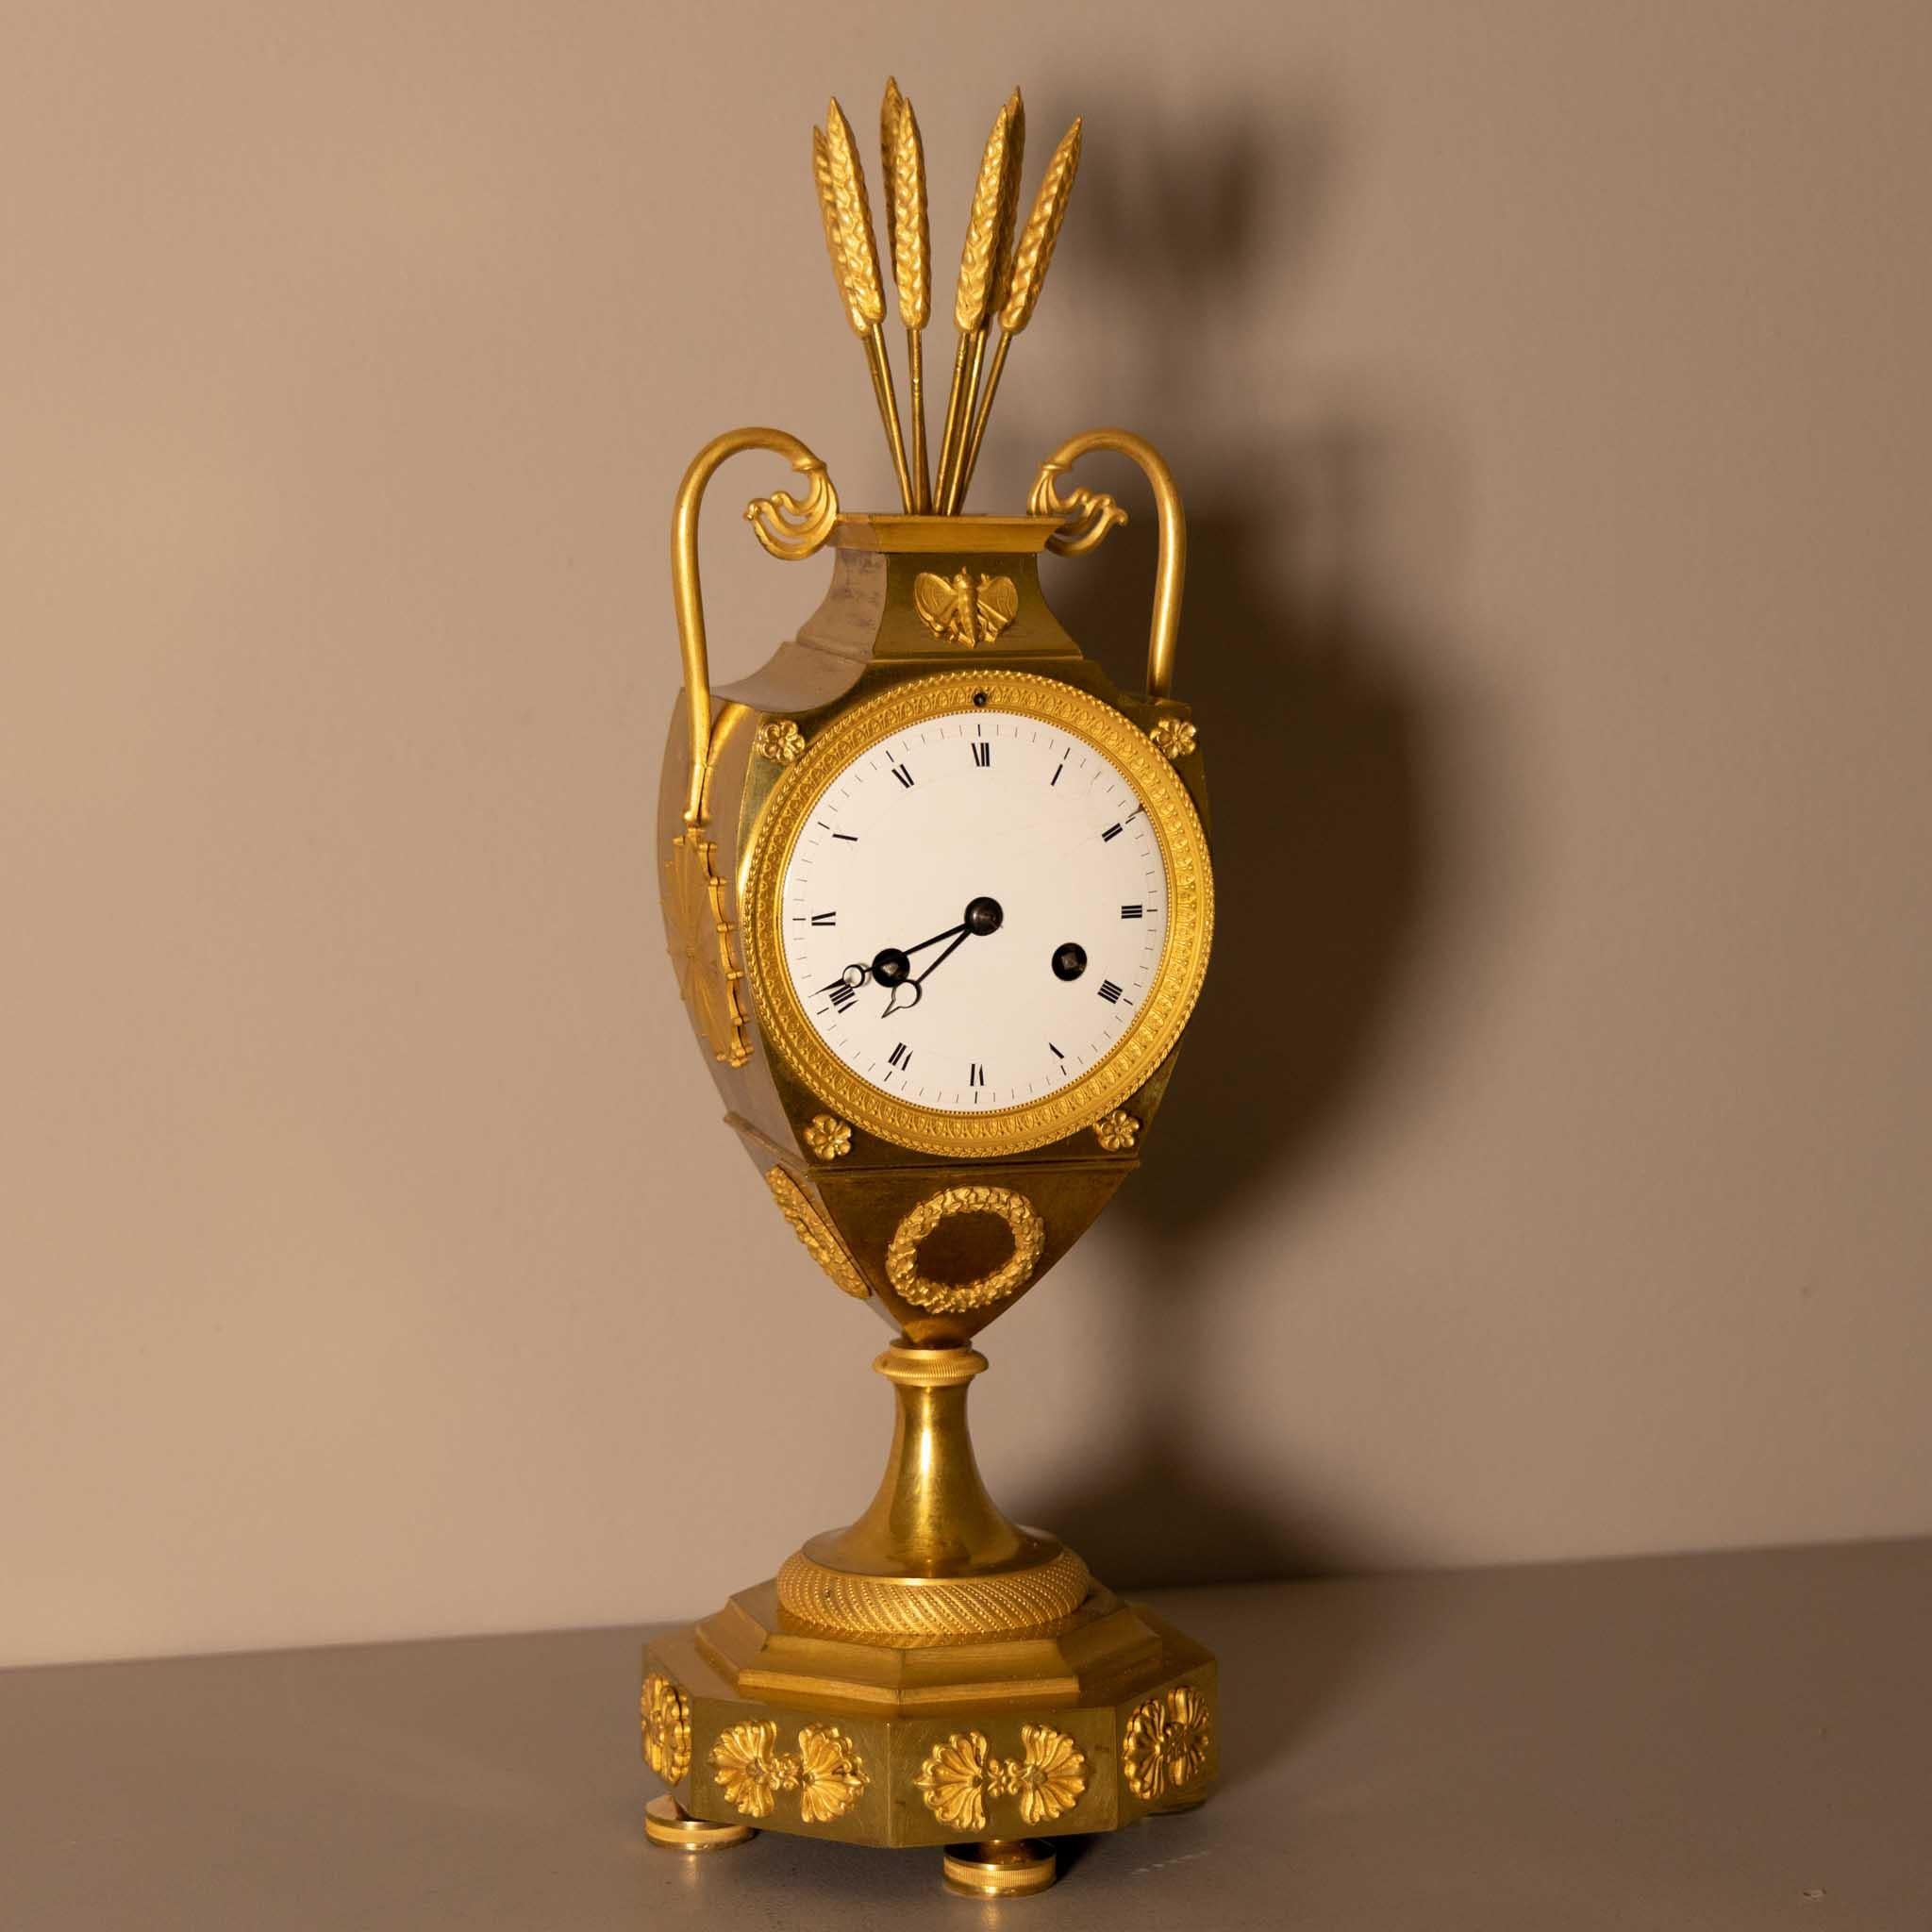 Fire-gilt bronze mantle clock with an amphora-shaped case on an octagonal stand and applied decorations in the form of ears of grain, velaria, laurel wreaths and butterflies. The enamel dial with Roman numerals.